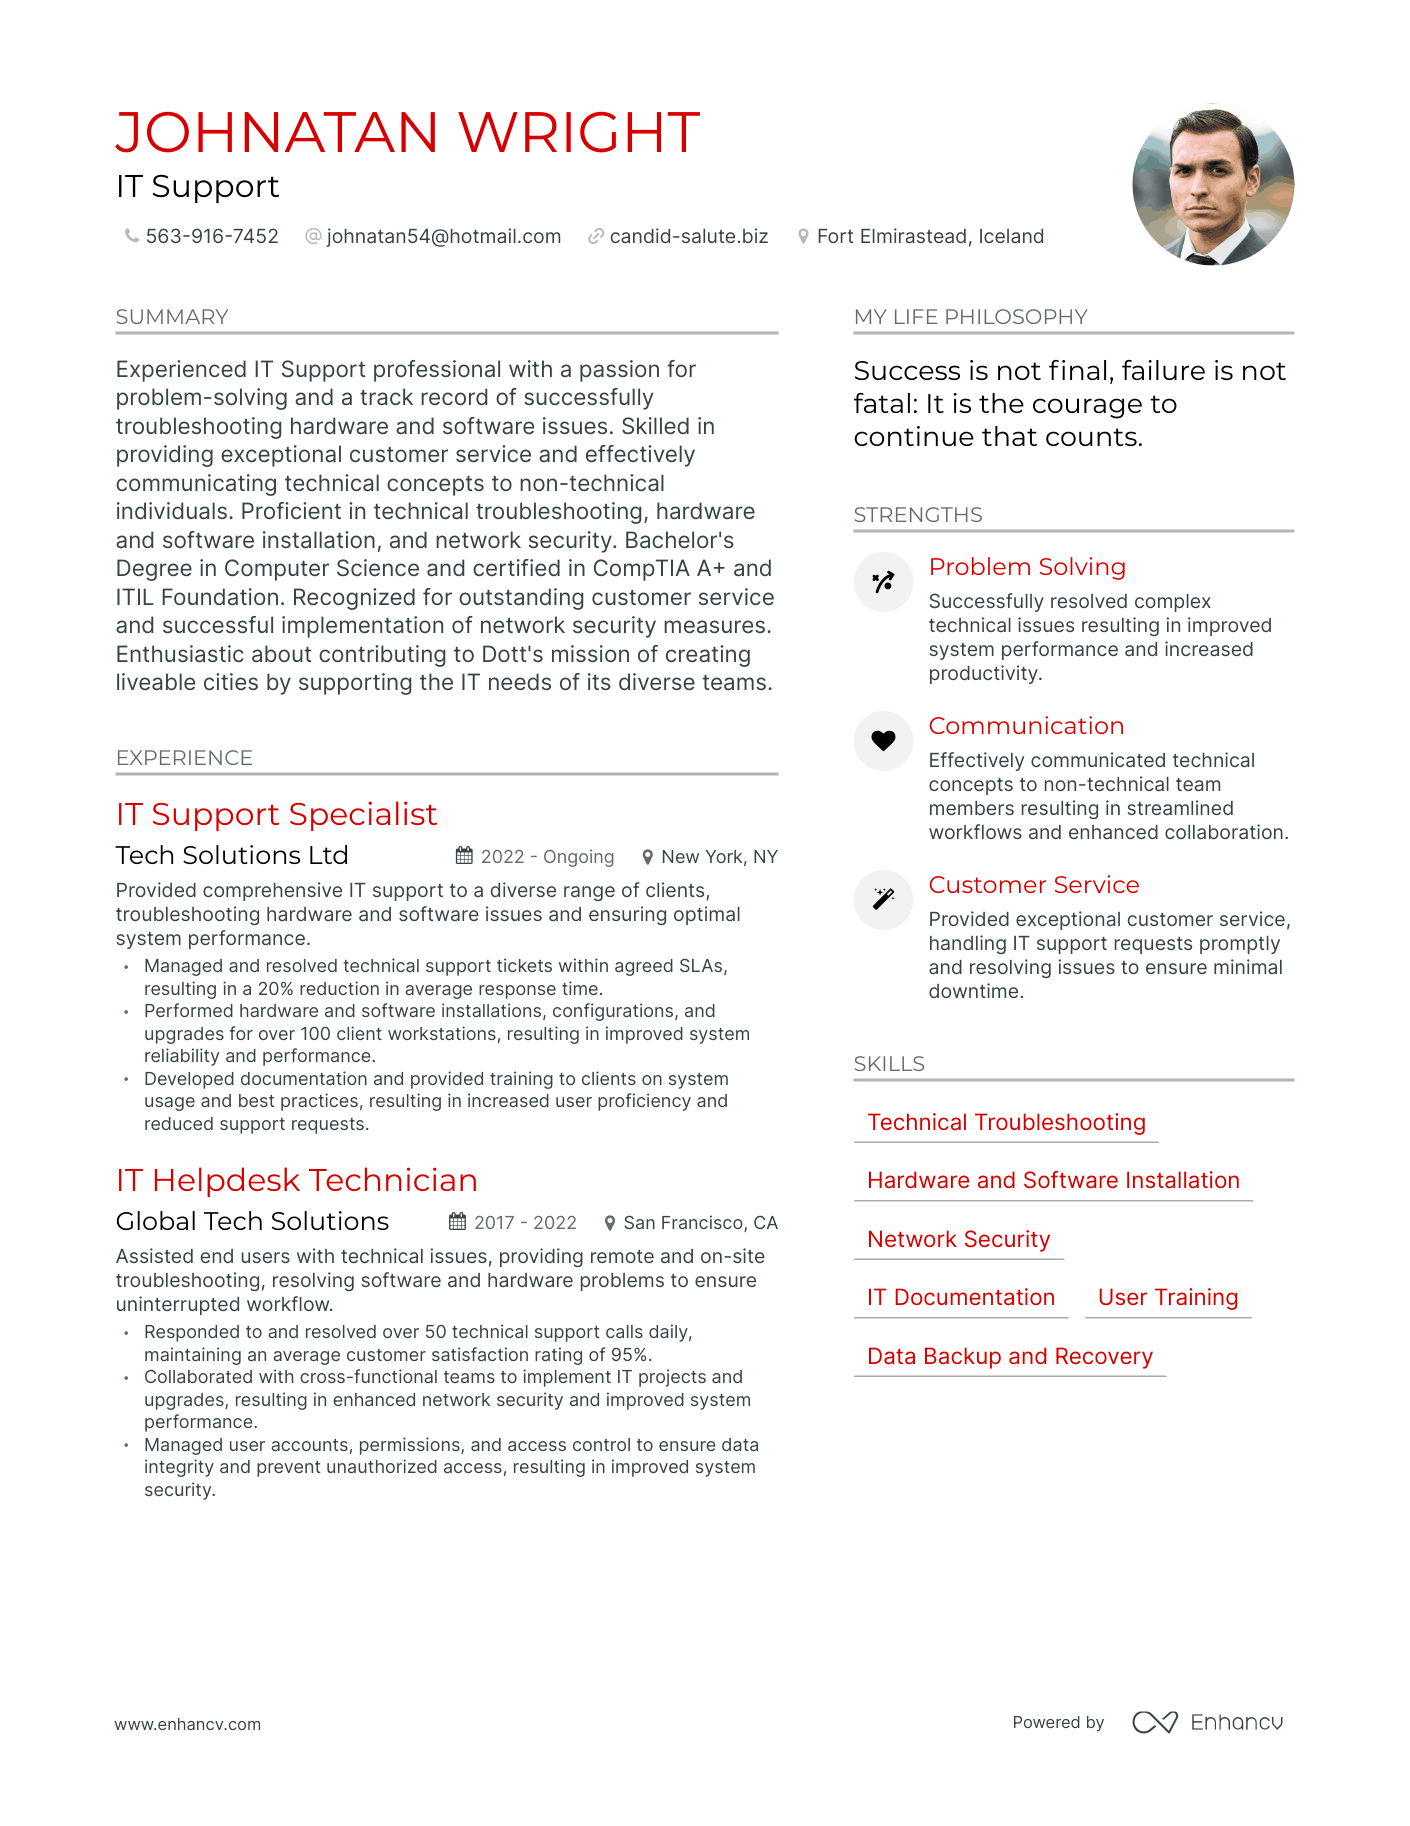 IT Support resume example